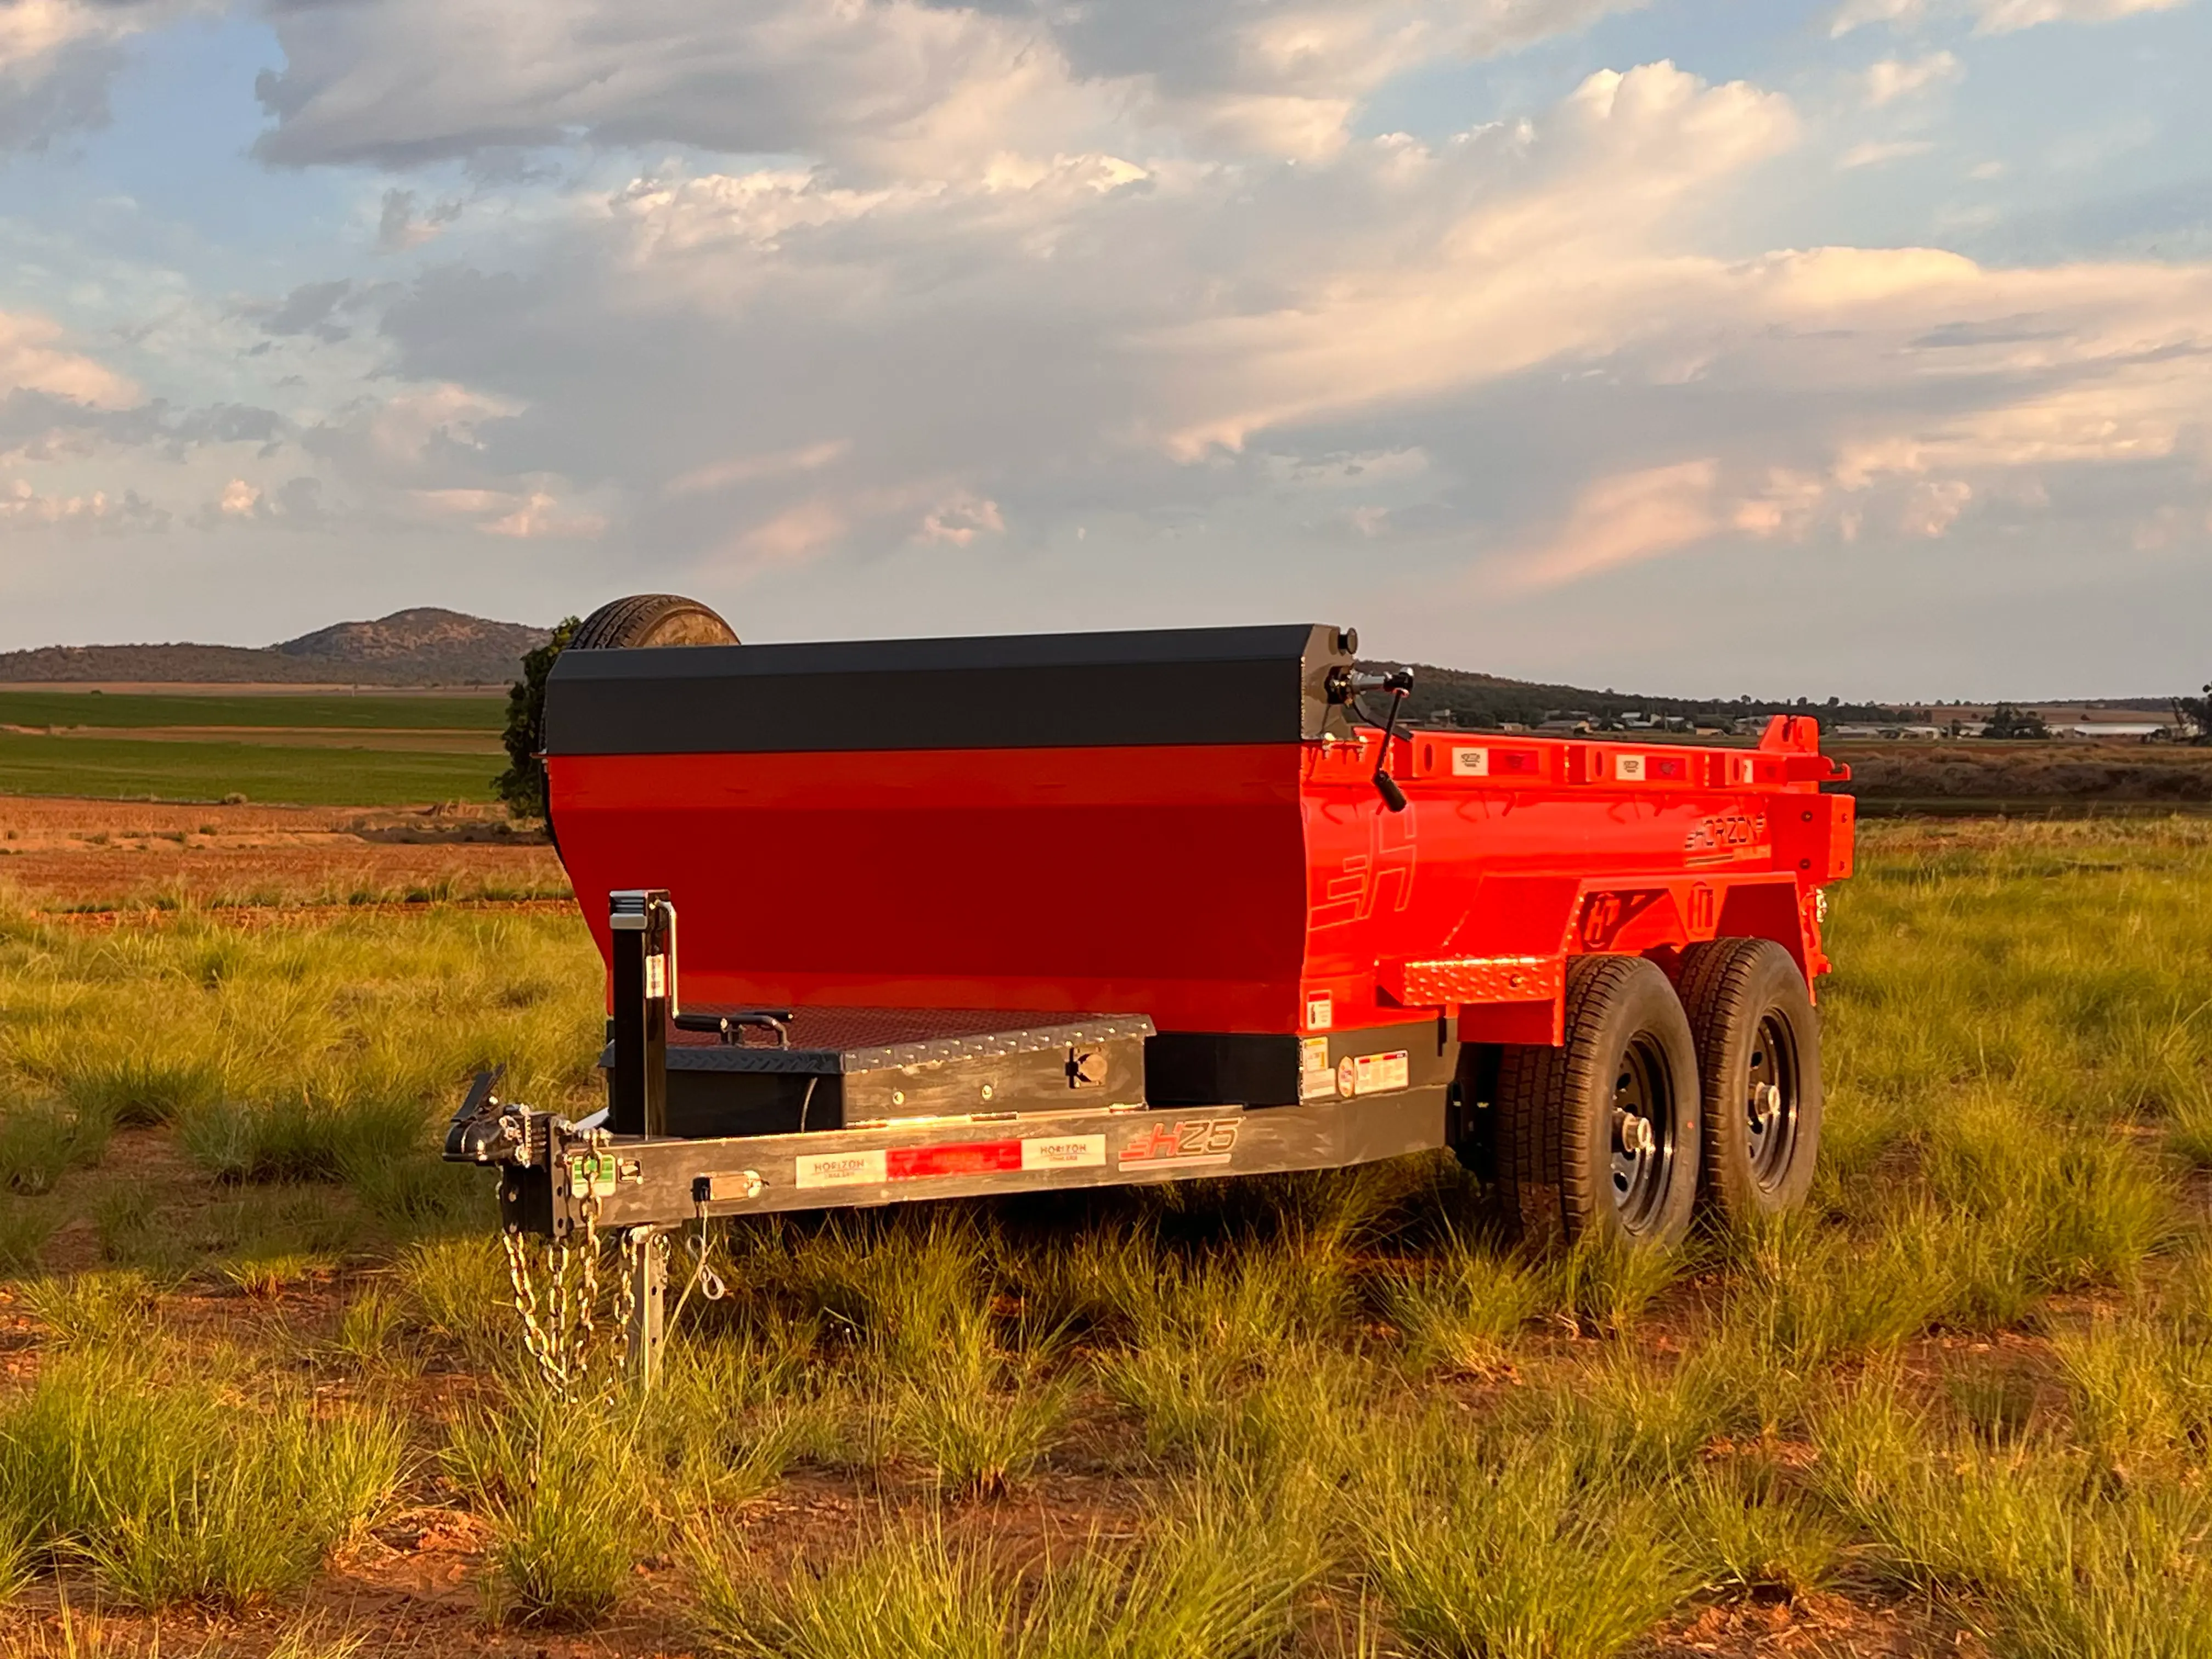 Small but mighty dump trailer the HZ5 by Horizon